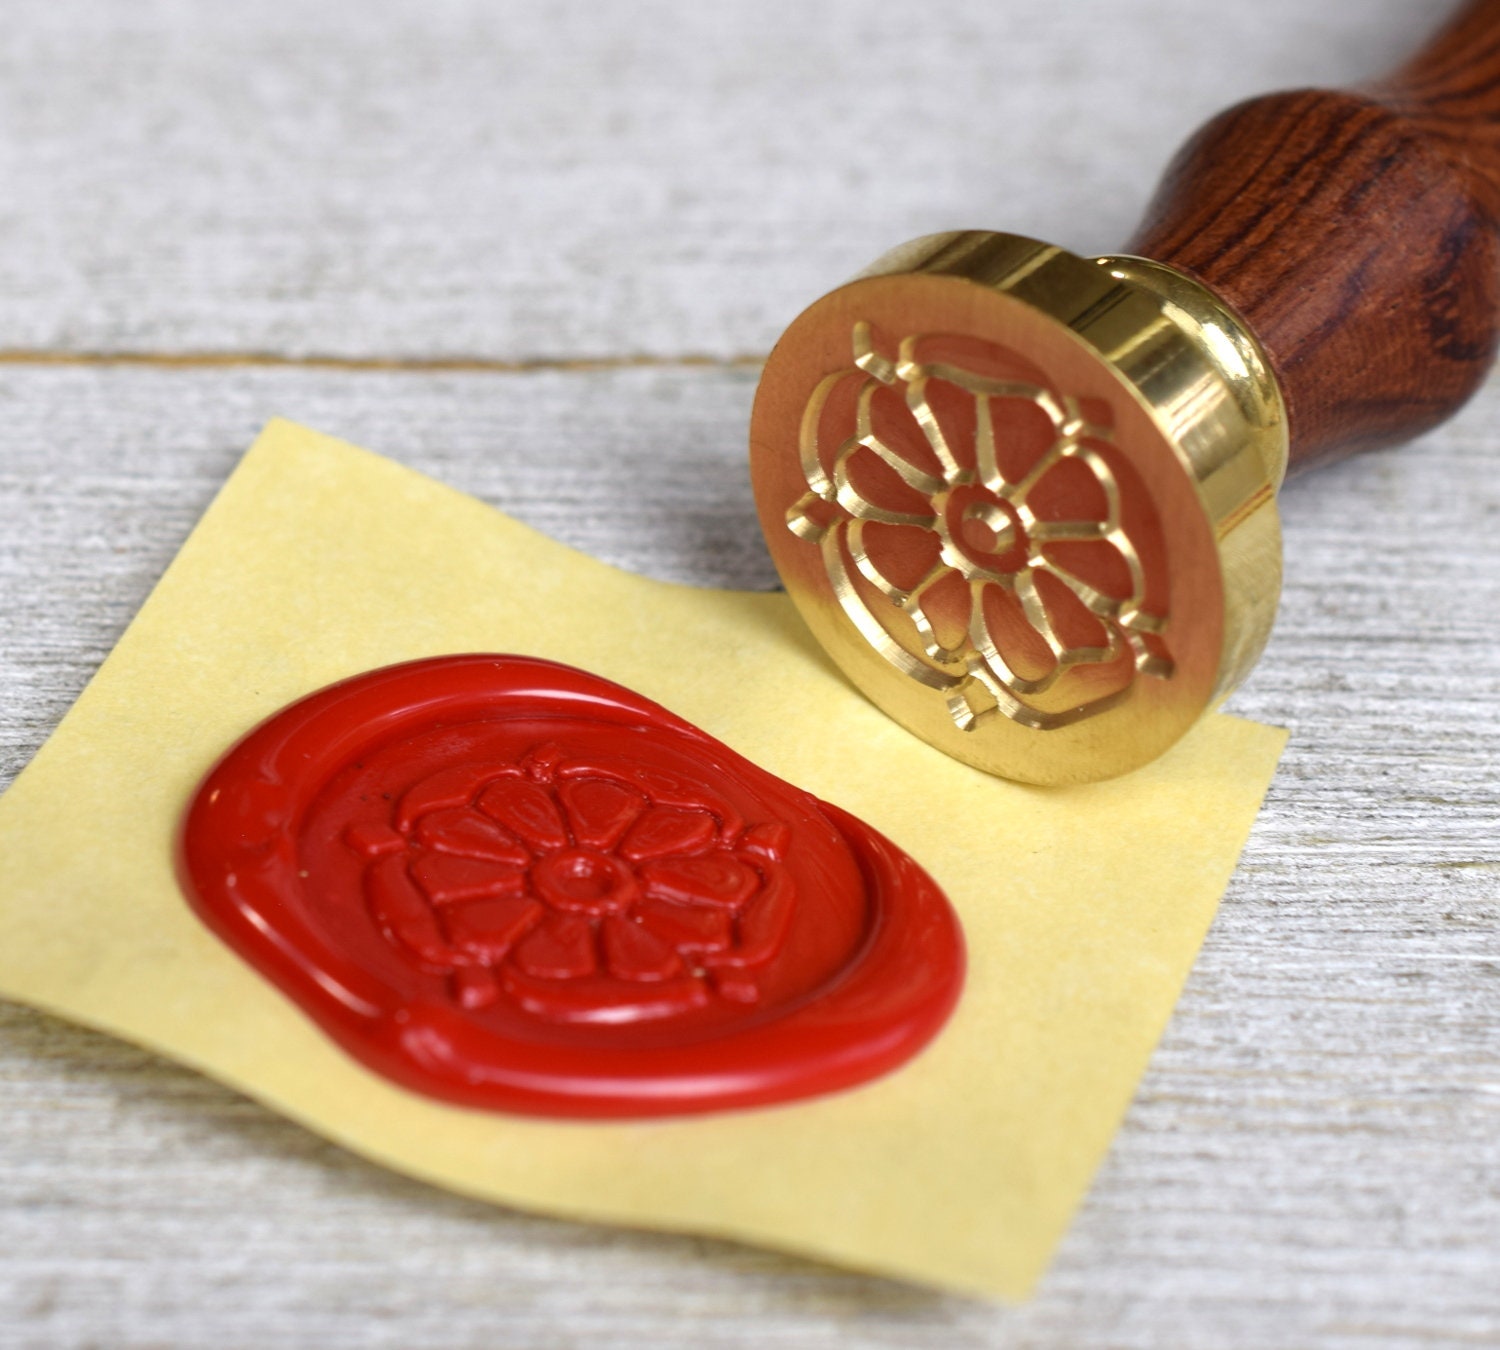 Hesroicy Wax Seal Mold Reusable Portable Durable Safe to Touch Sturdy DIY  Simple Operation DIY Wax Sealing Stamp Silicone Mold Mat Home Use for  Handicraft 